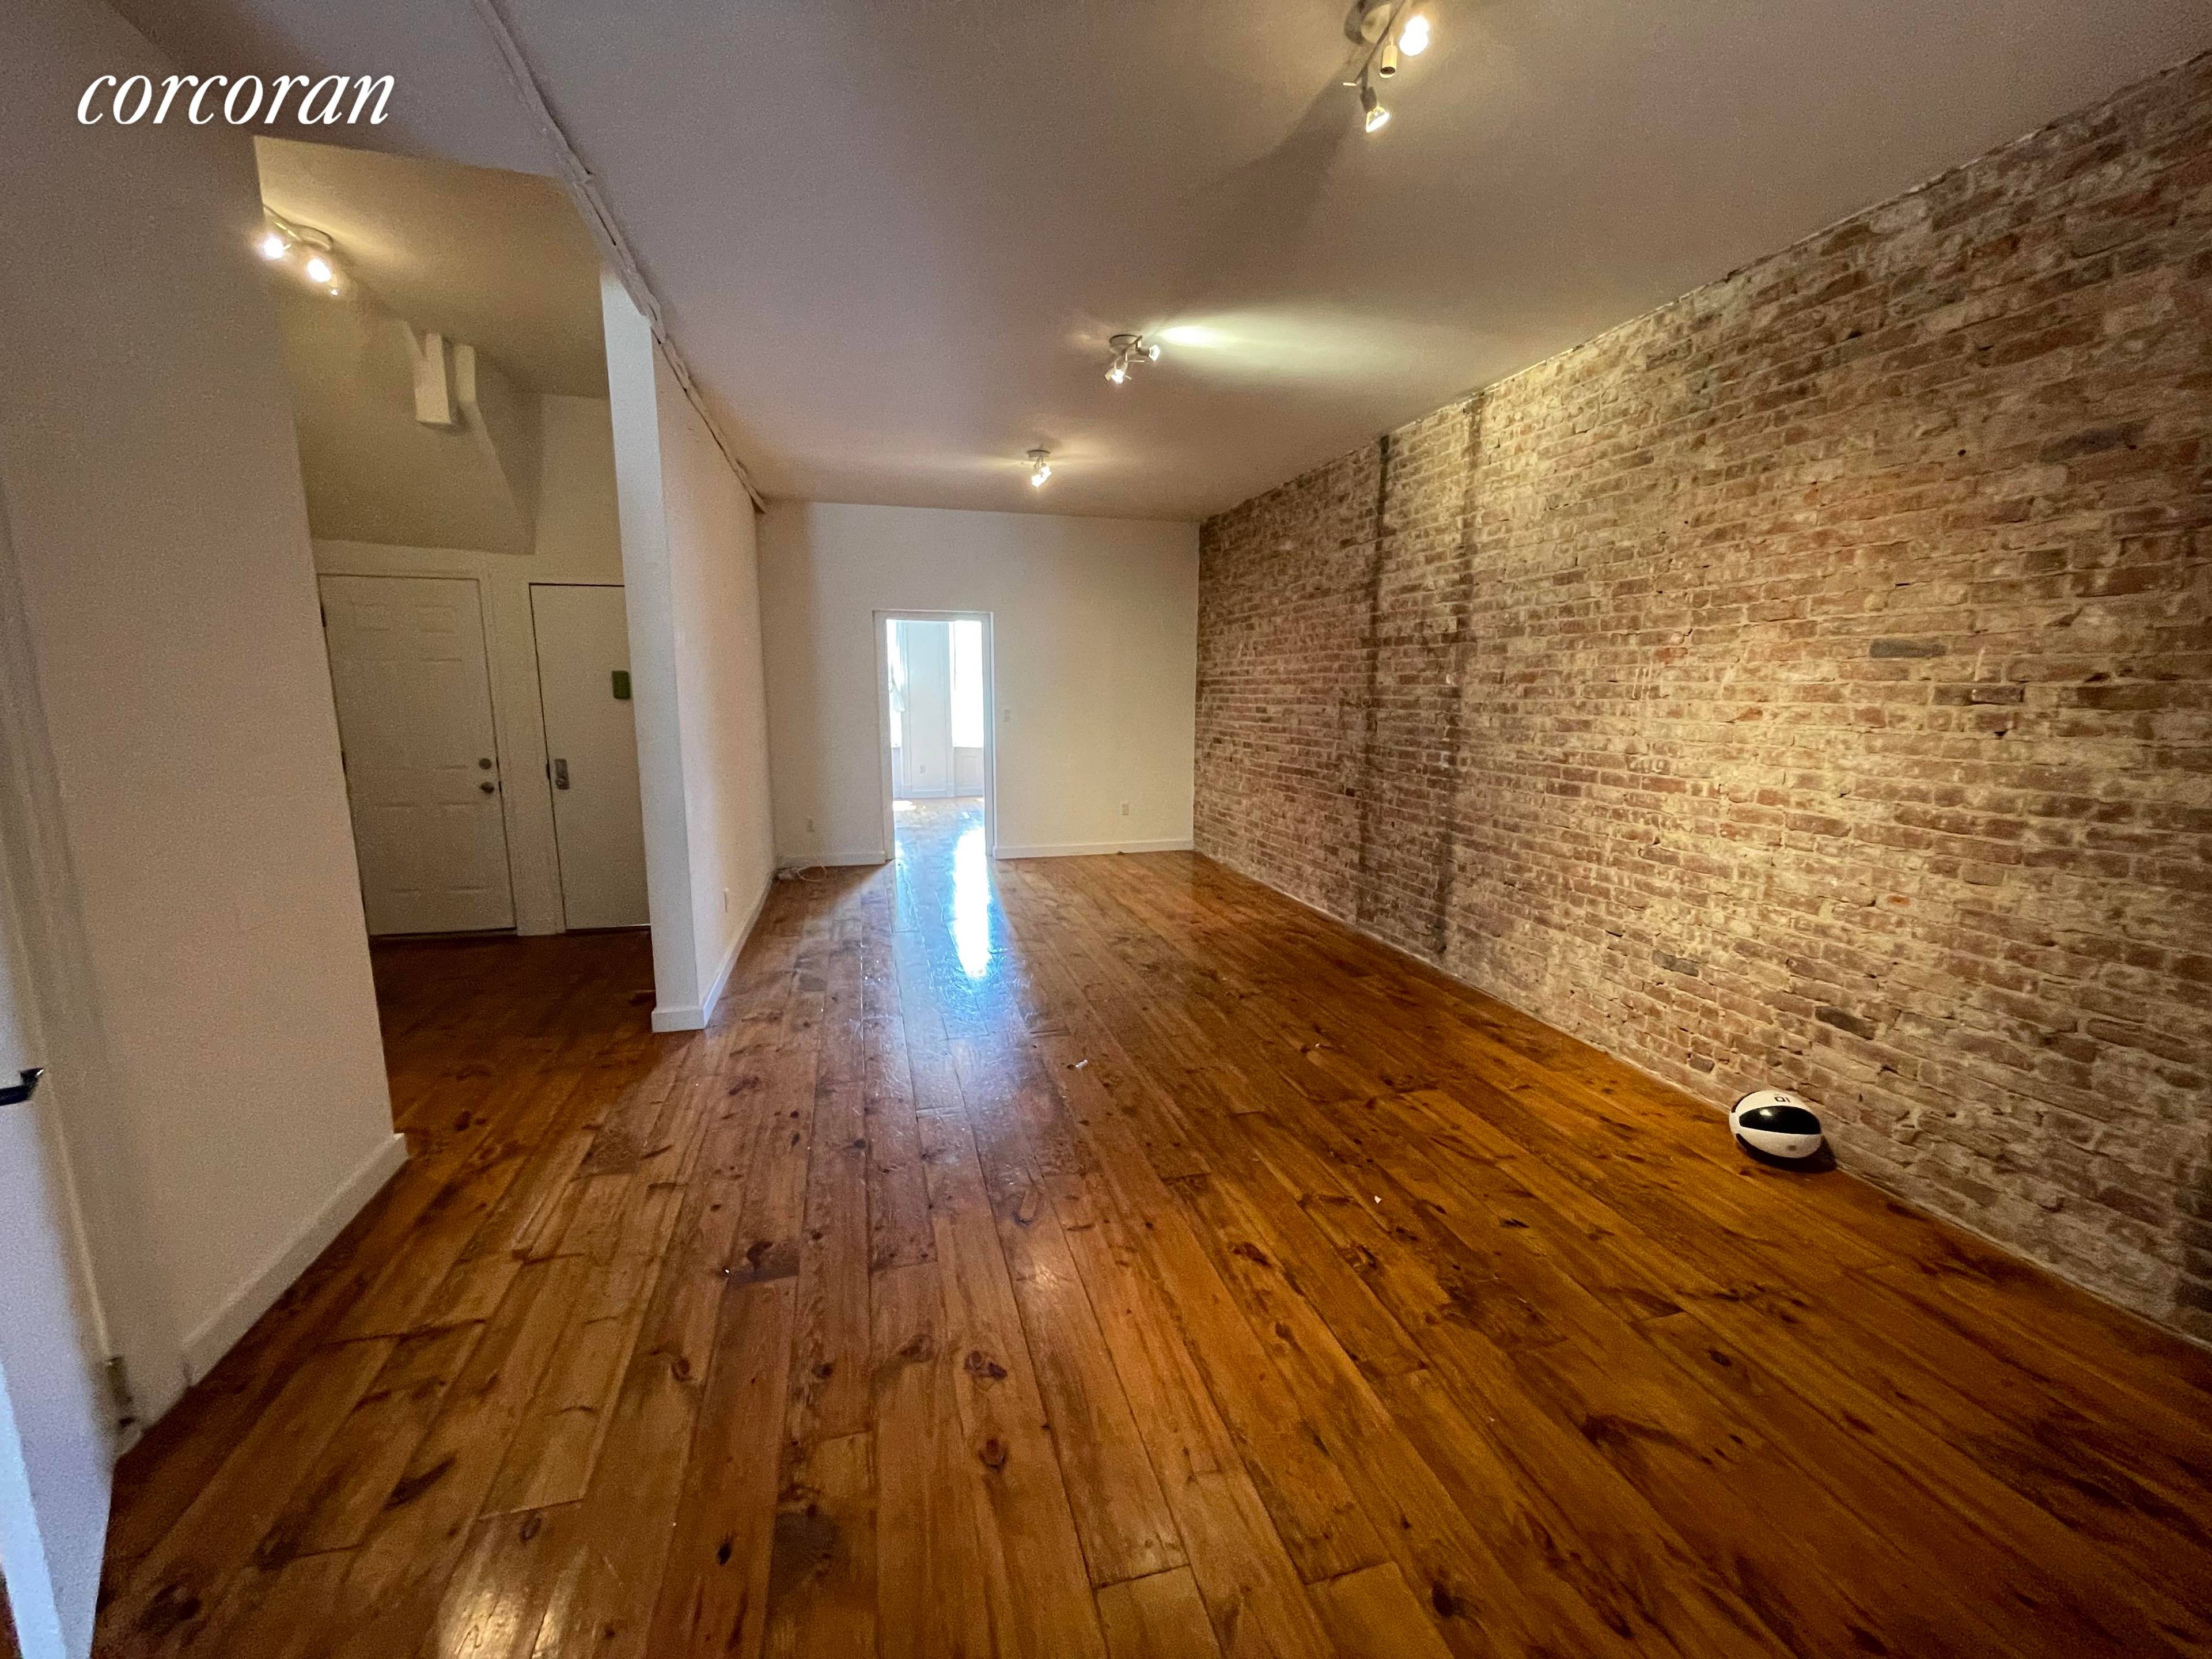 Fantastic large two bedroom in Bushwick with exposed brick and tons of charm.